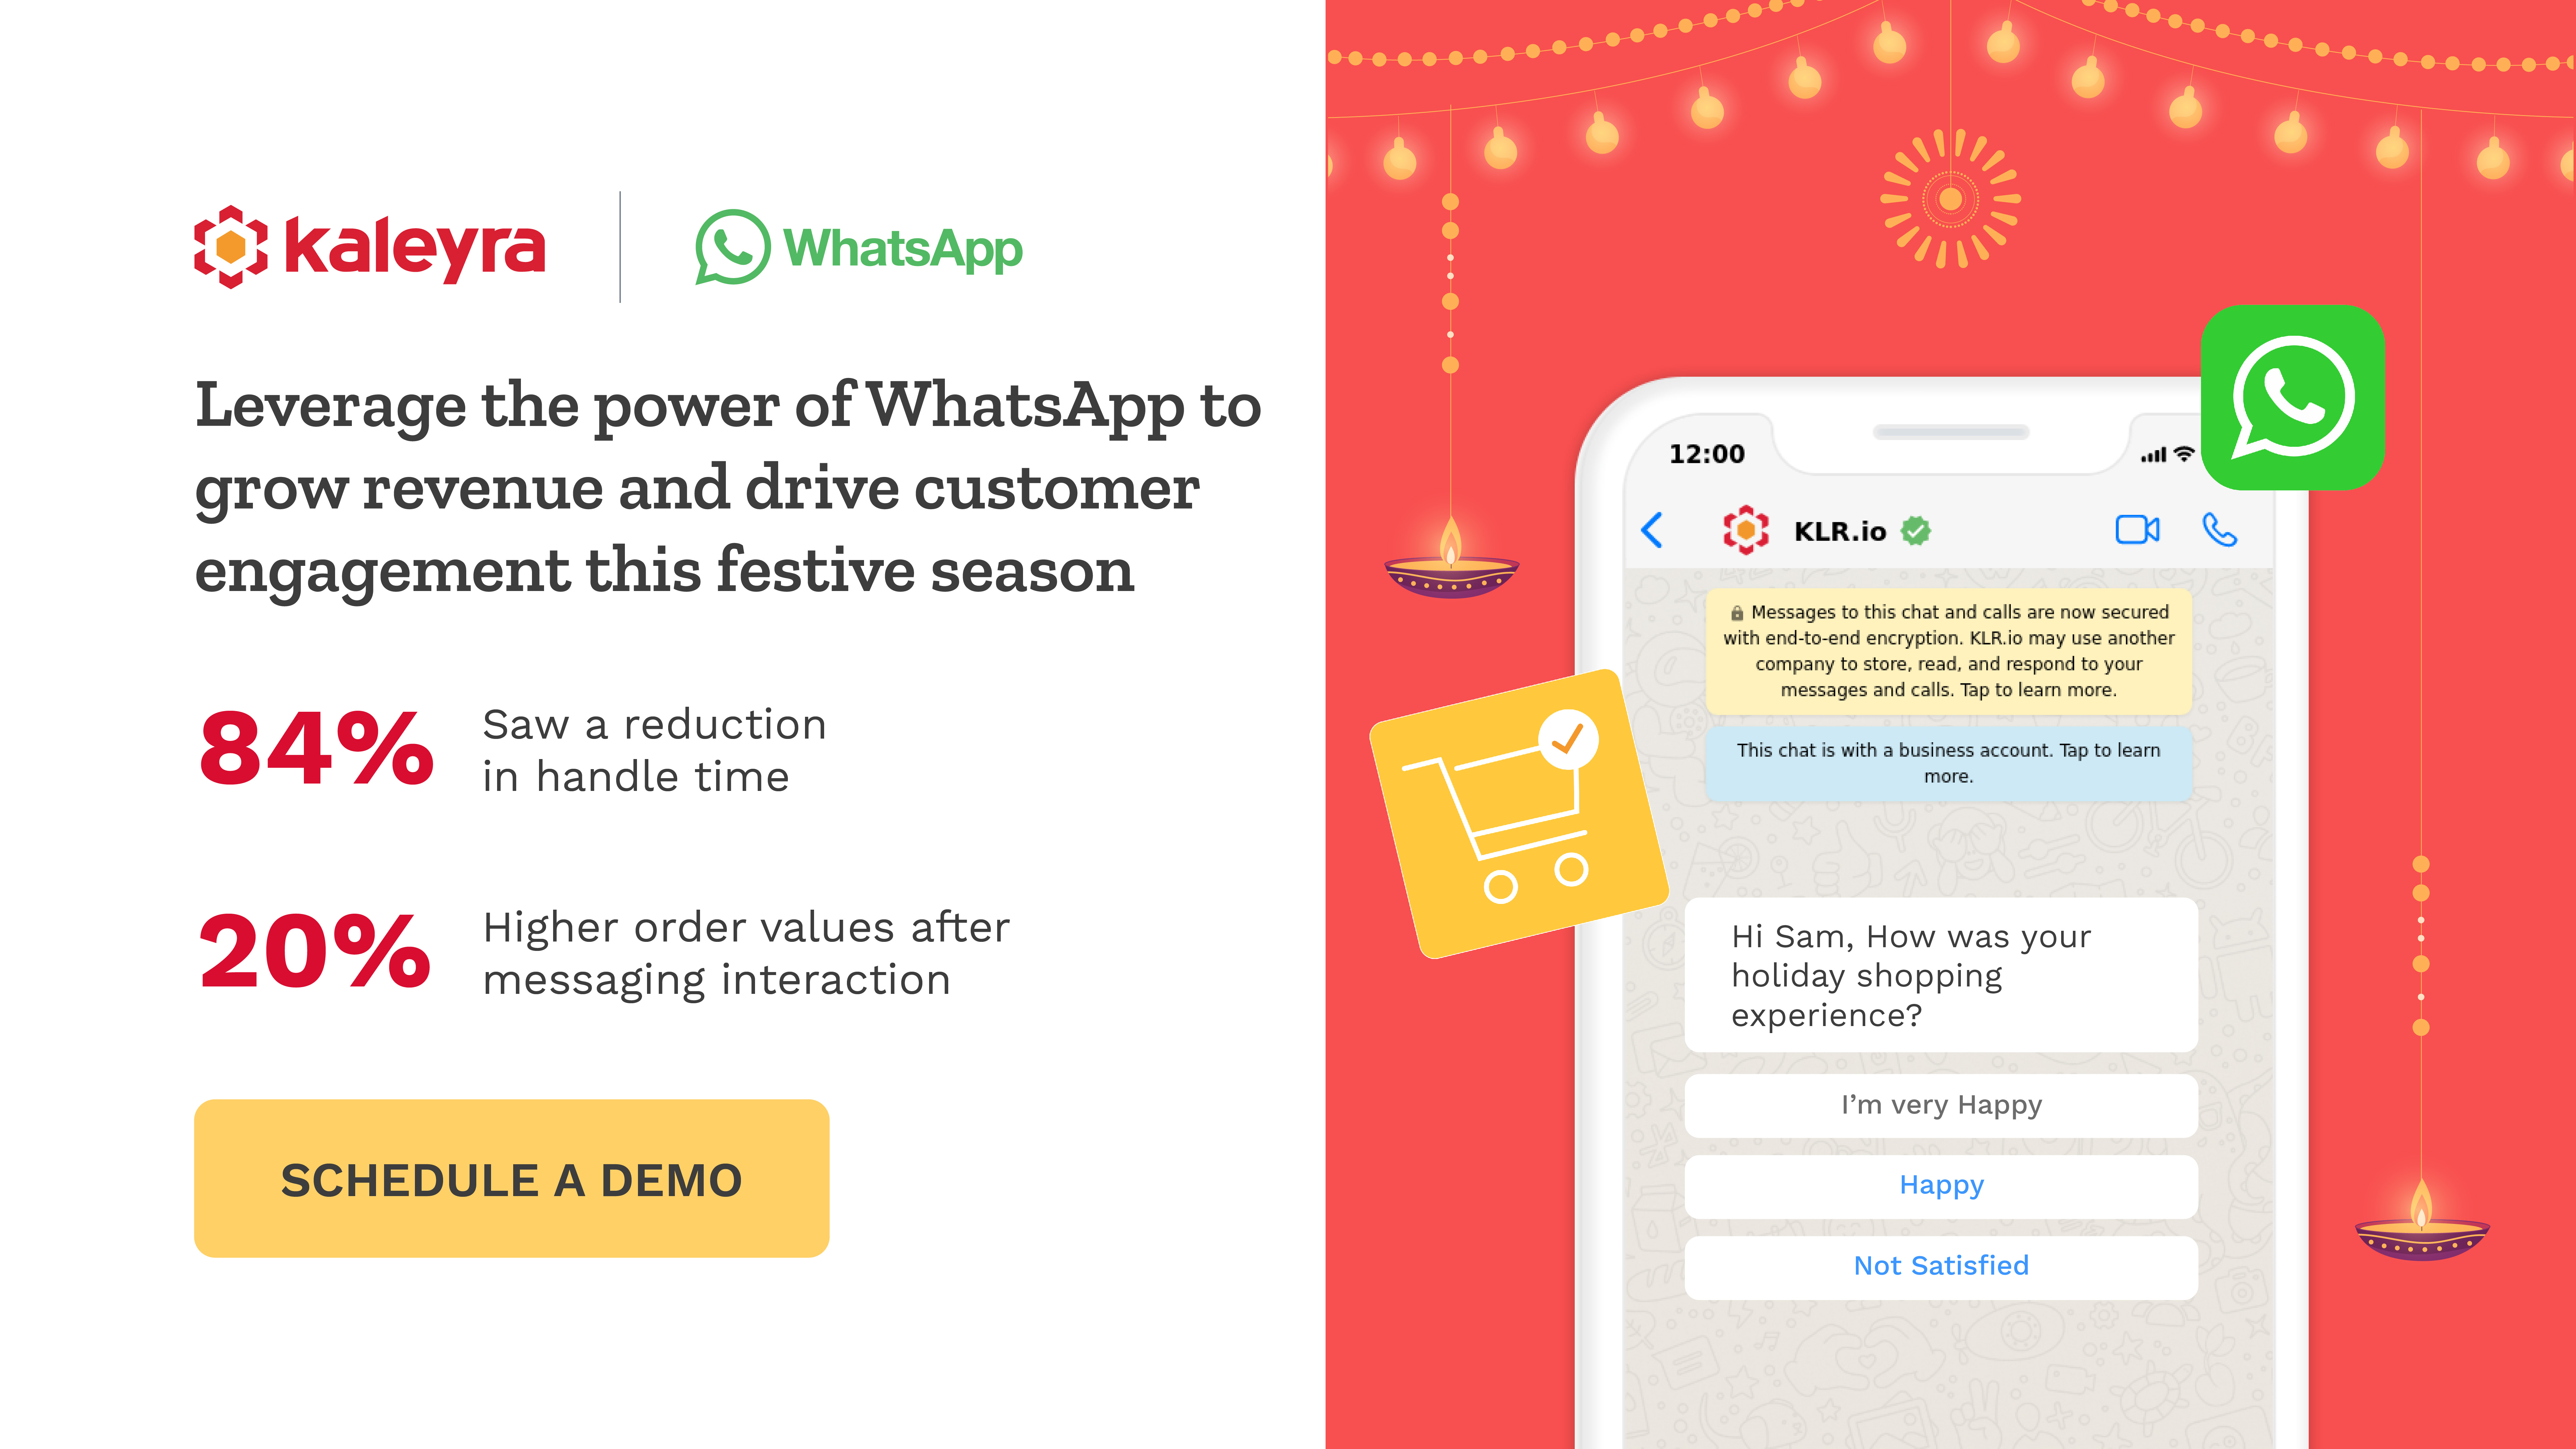 Collect Feedback From New and Existing Customers

Holiday marketing campaigns can lure in new customers. By sharing surveys on WhatsApp, you can uncover any challenges that new customers may have had, allowing you to address these concerns promptly. Incorporating surveys into your onboarding process on WhatsApp helps improve customer satisfaction. 

WhatsApp is an excellent channel for gathering feedback because it is easier for customers to share their opinions in real-time.  Collecting feedback helps you assess your brand perception and make any necessary changes in procedure accordingly. 

WhatsApp marketing campaigns feedback